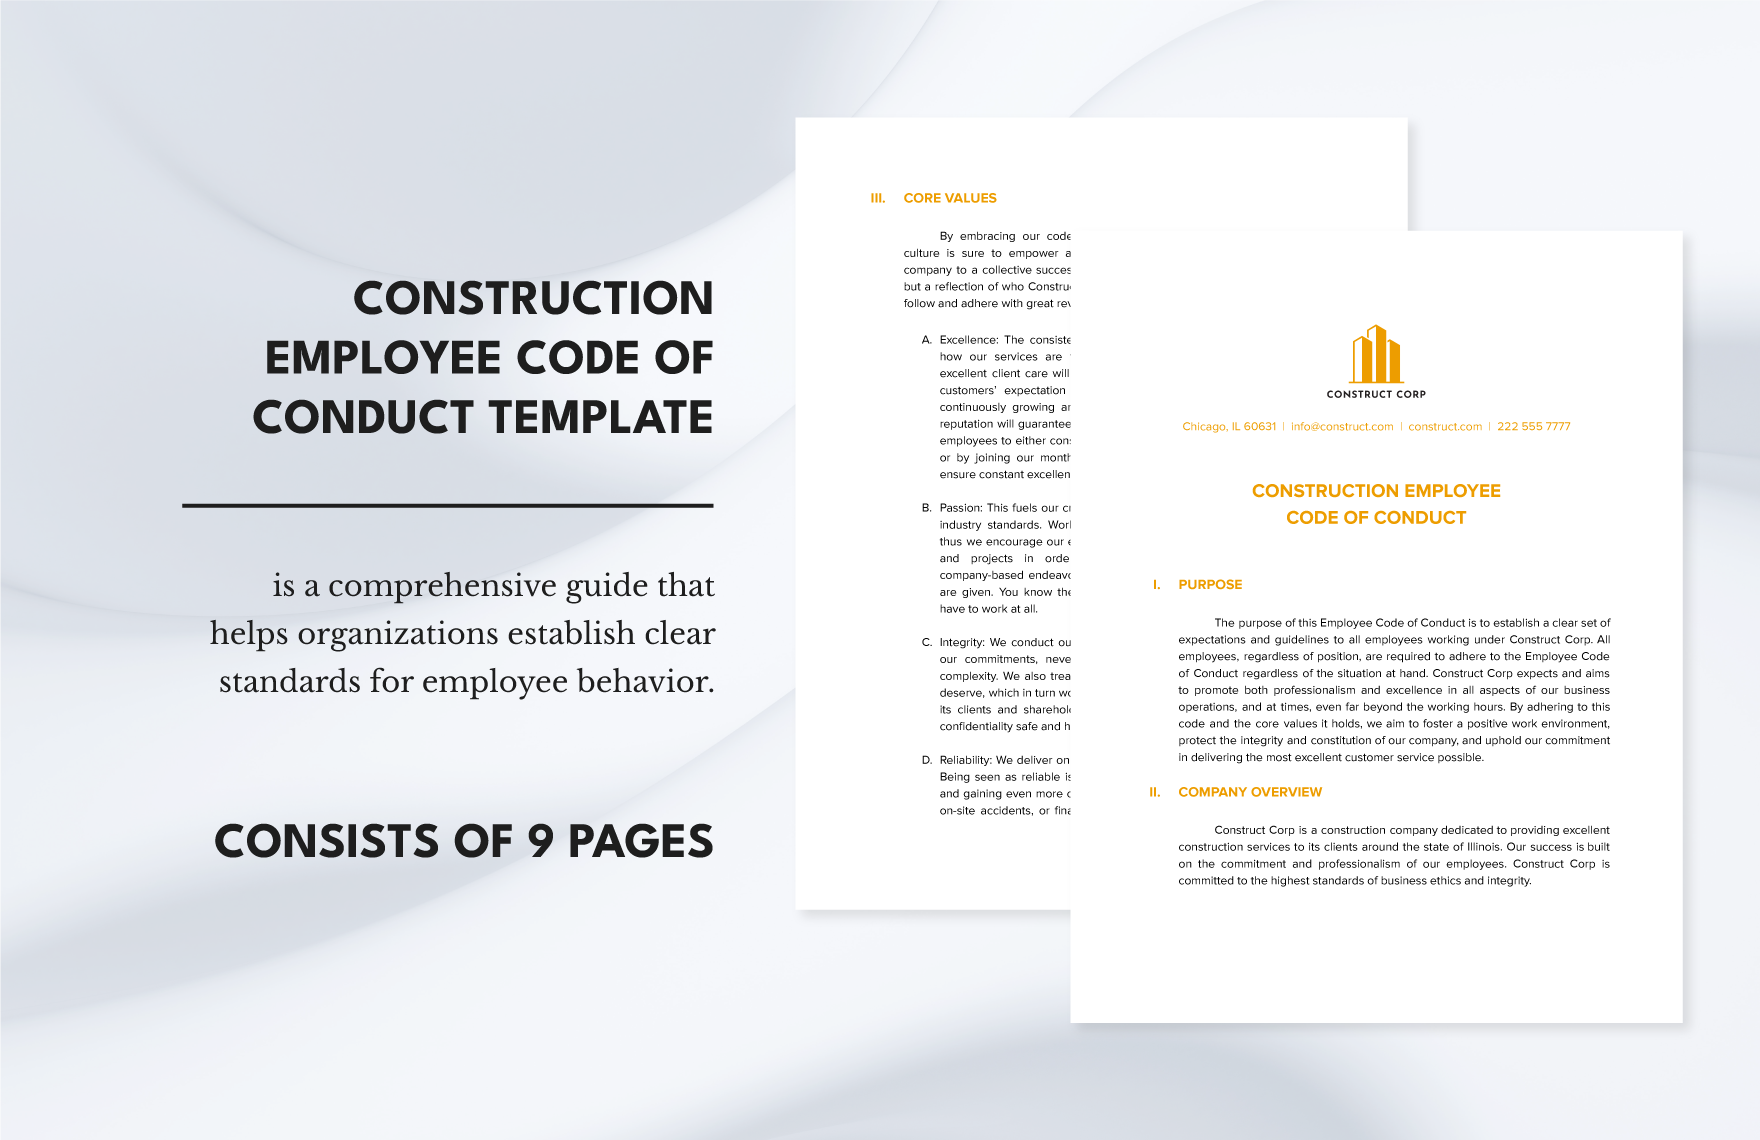 Construction Employee Code of Conduct Template